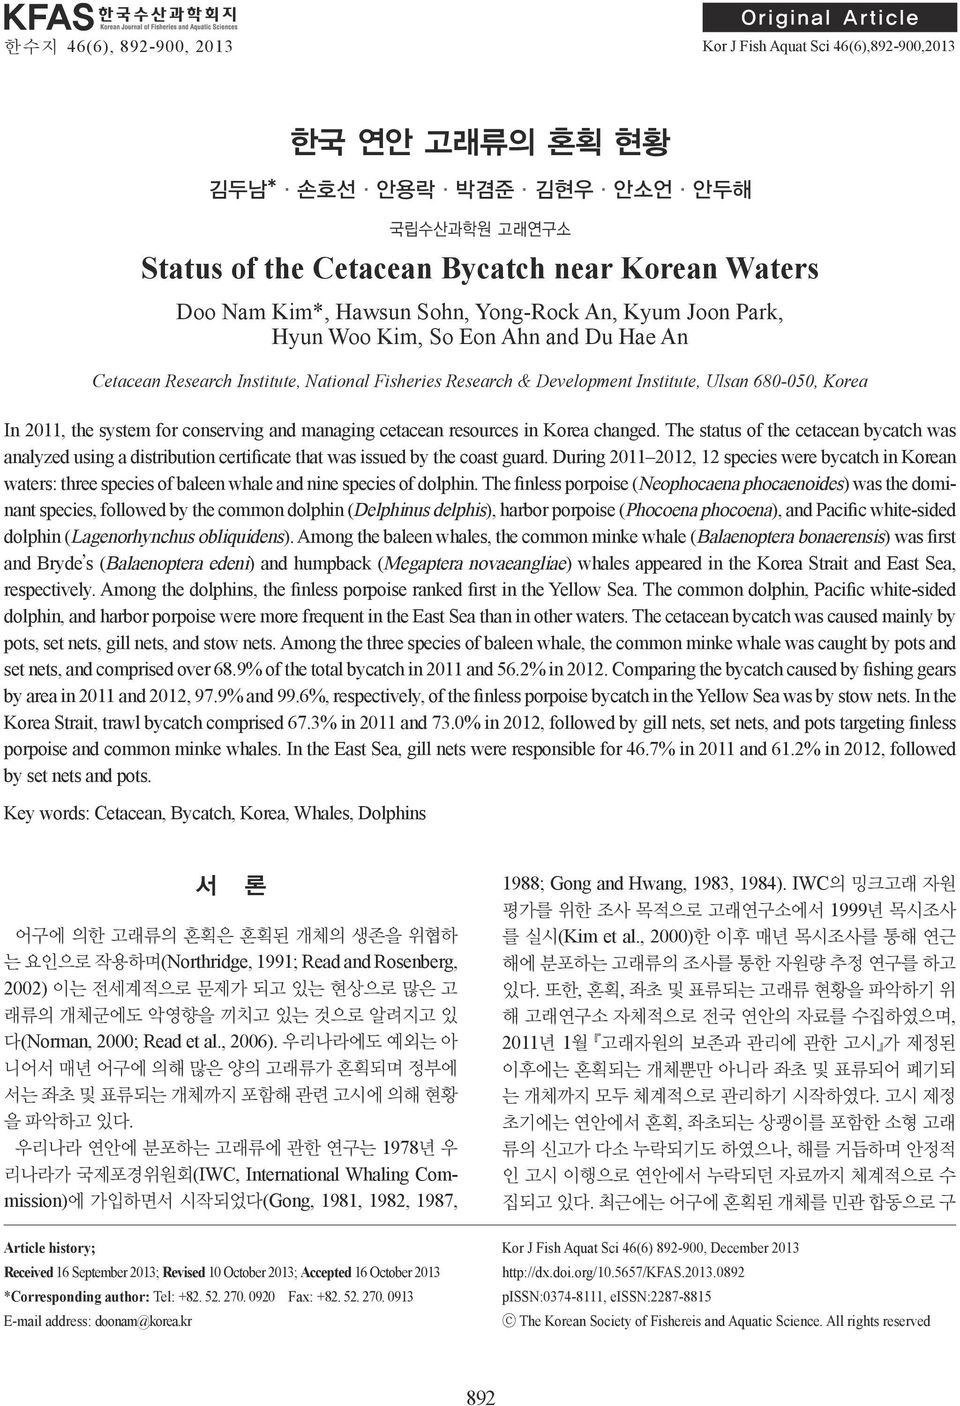 cnserving and managing cetacean resurces in Krea changed. The status f the cetacean bycatch was analyzed using a distributin certificate that was issued by the cast guard.